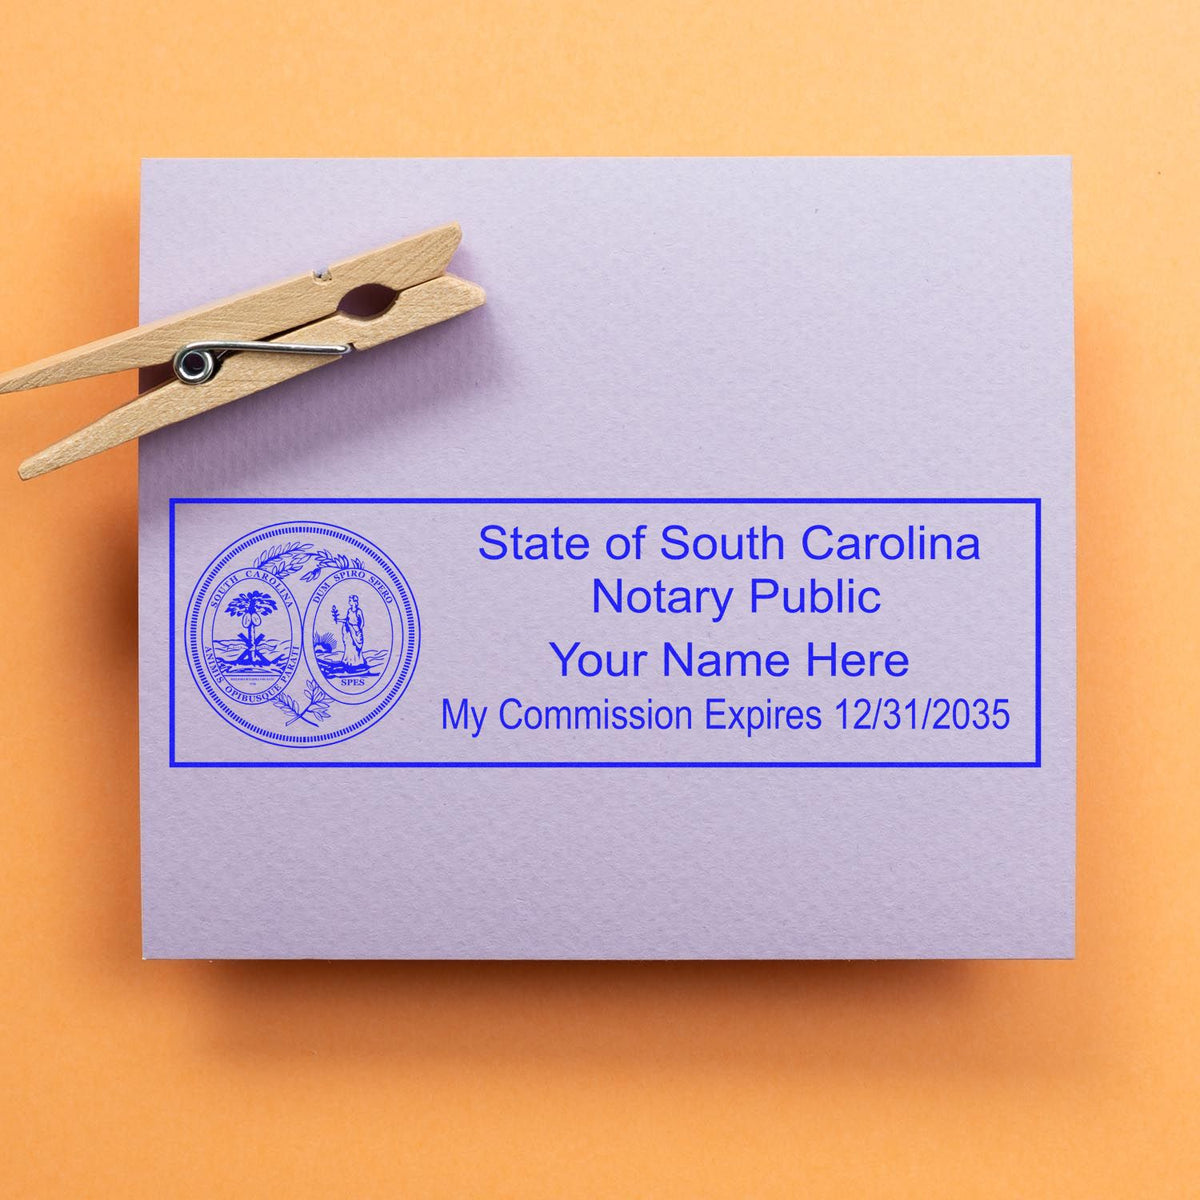 An alternative view of the Heavy-Duty South Carolina Rectangular Notary Stamp stamped on a sheet of paper showing the image in use